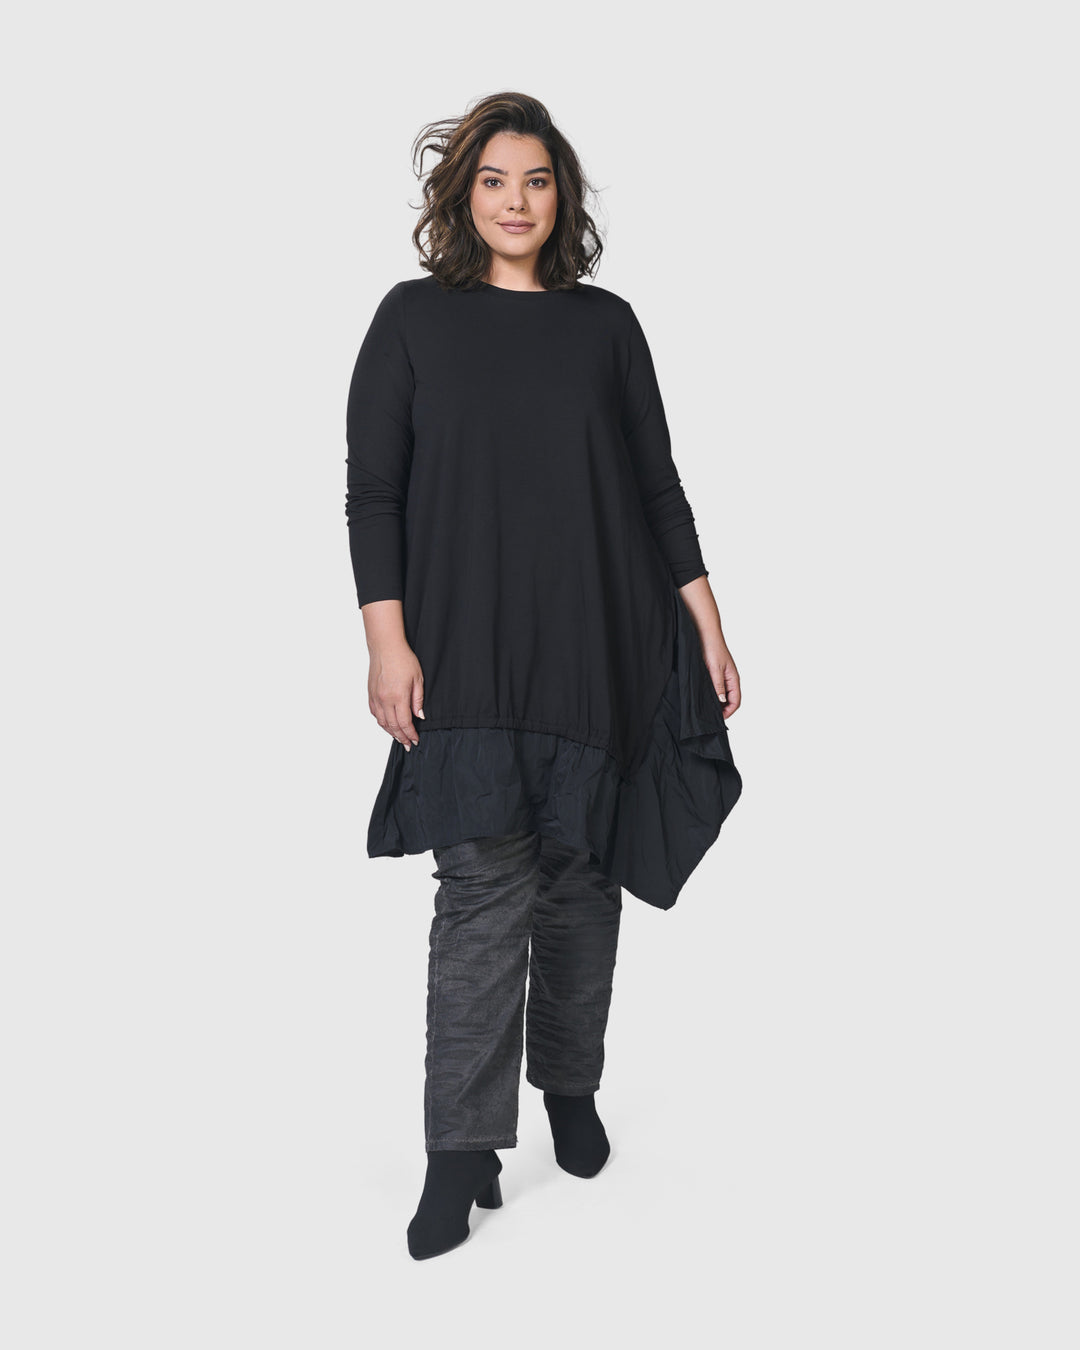 A woman wearing an ALEMBIKA Urban New Wave Tunic Top in Black with long sleeves and black pants.